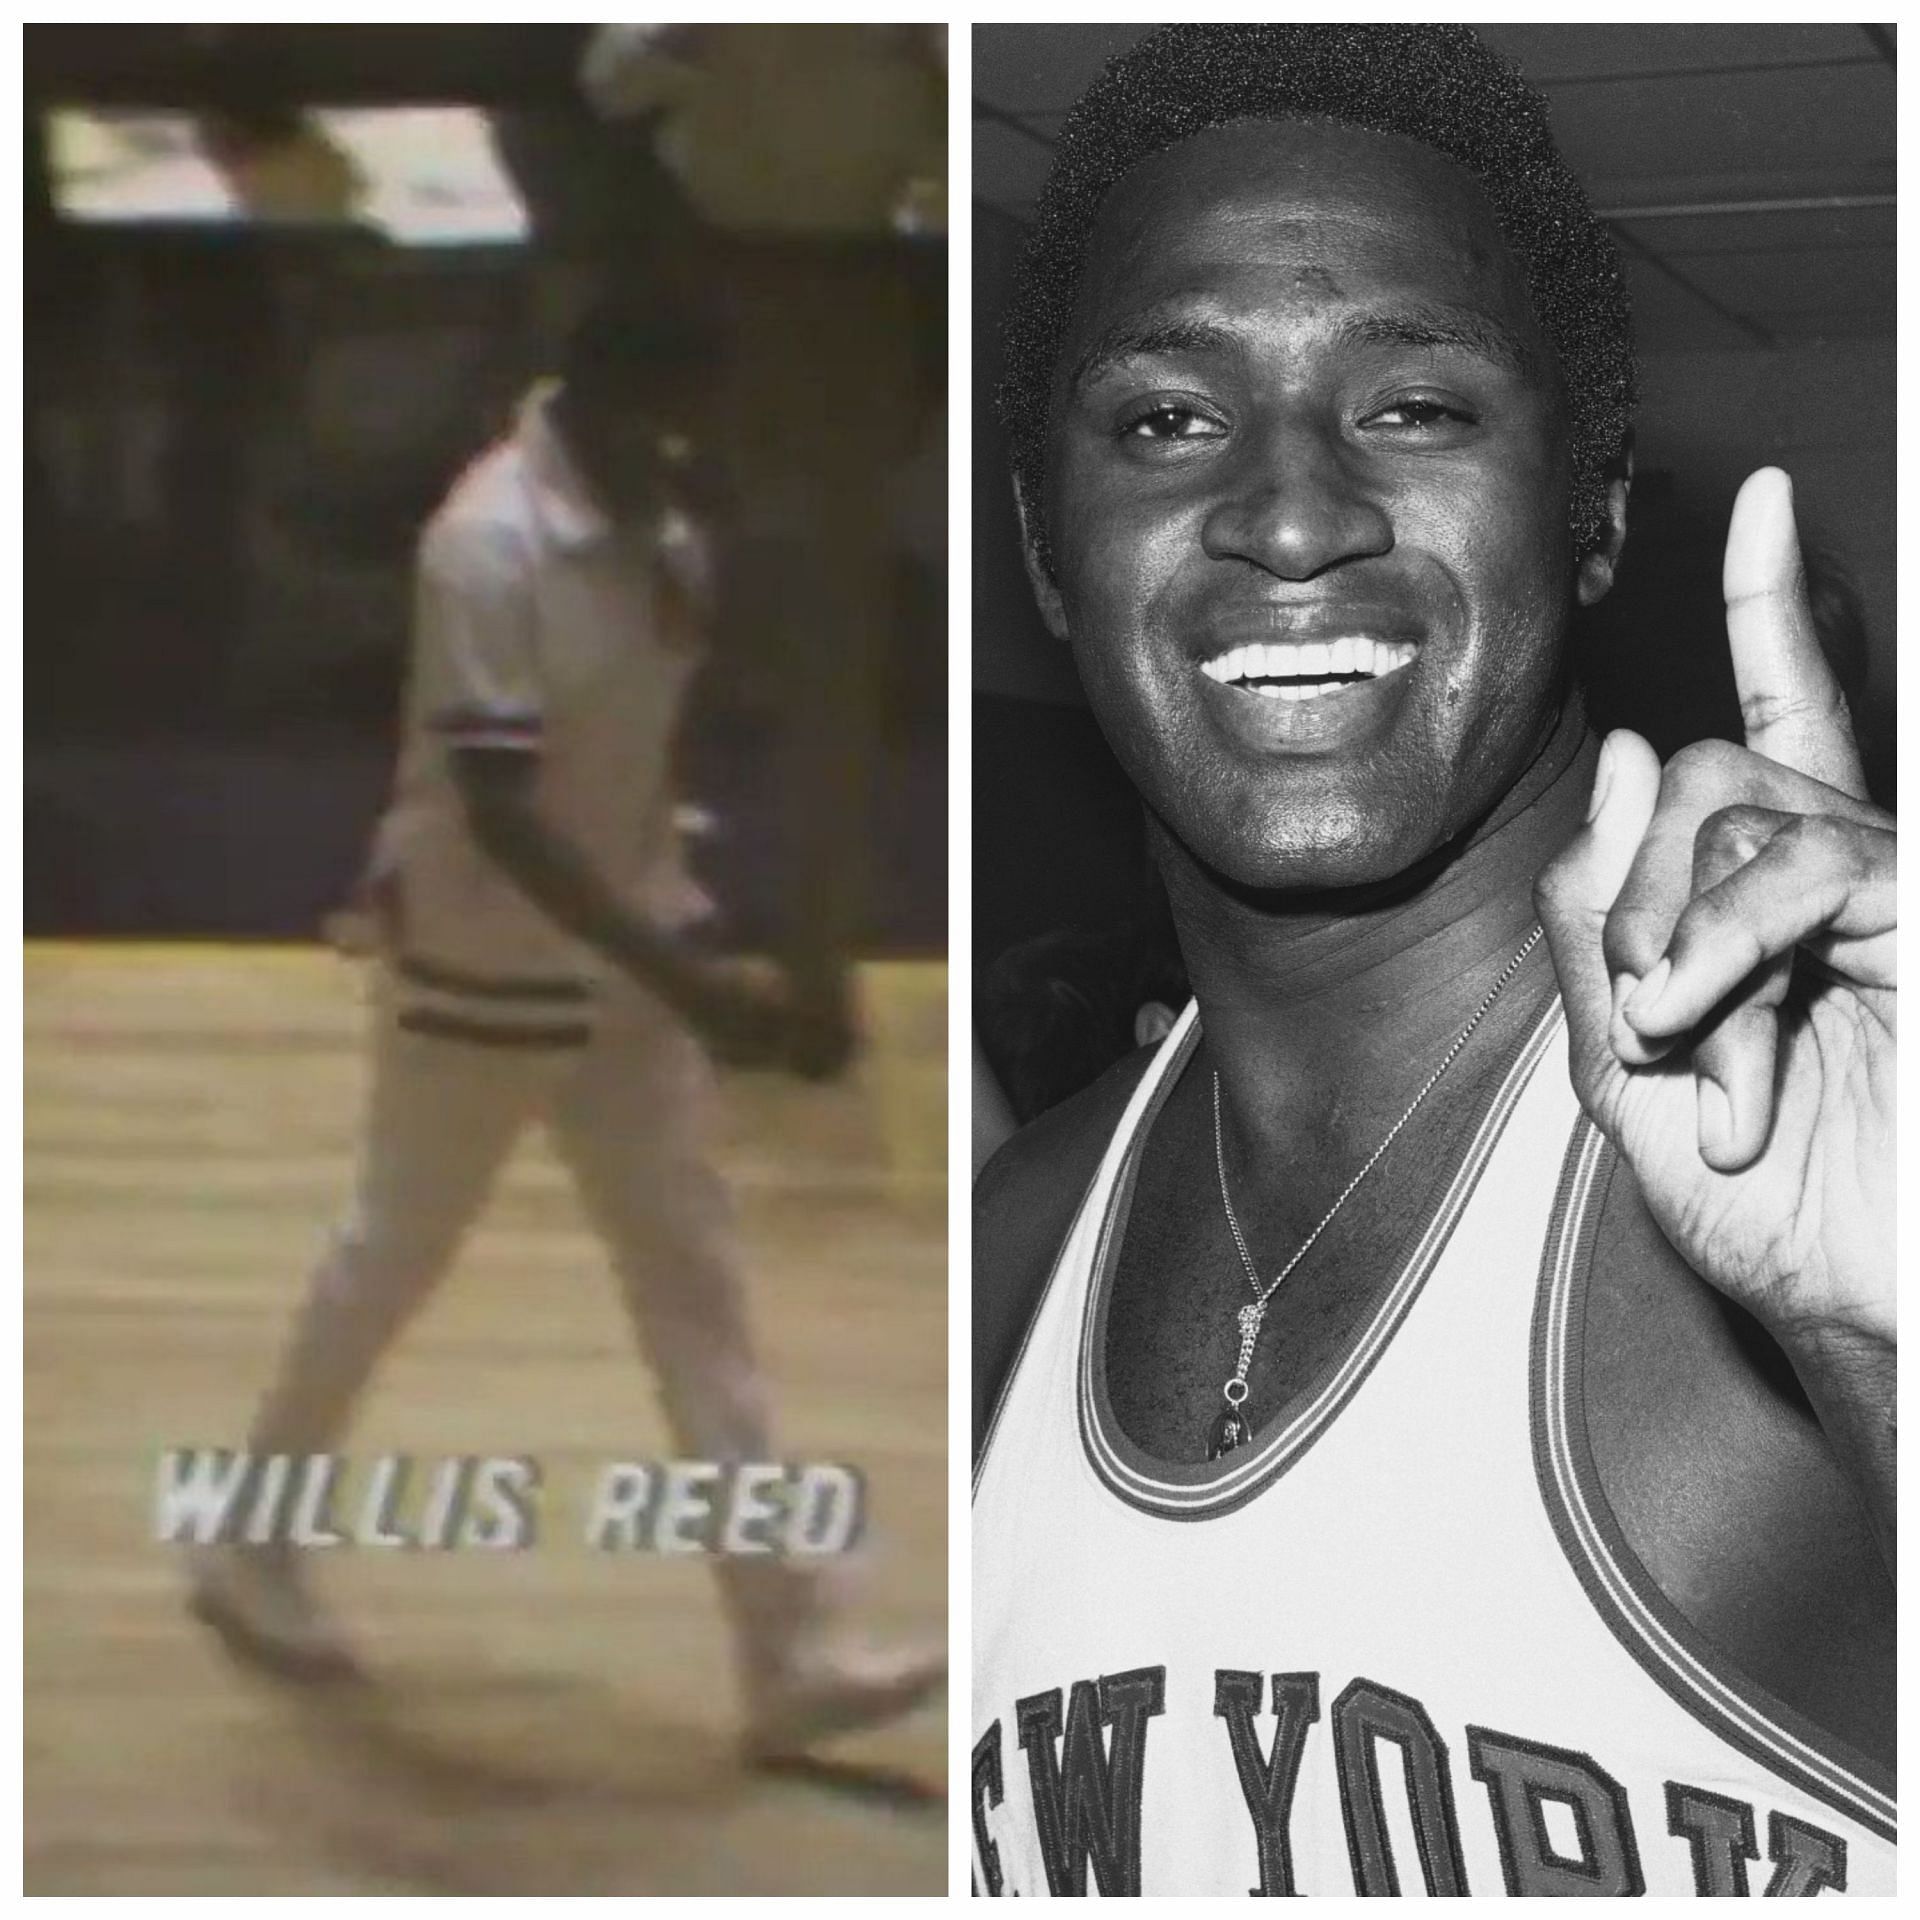 Willis Reed cam back from injury to win Game 7